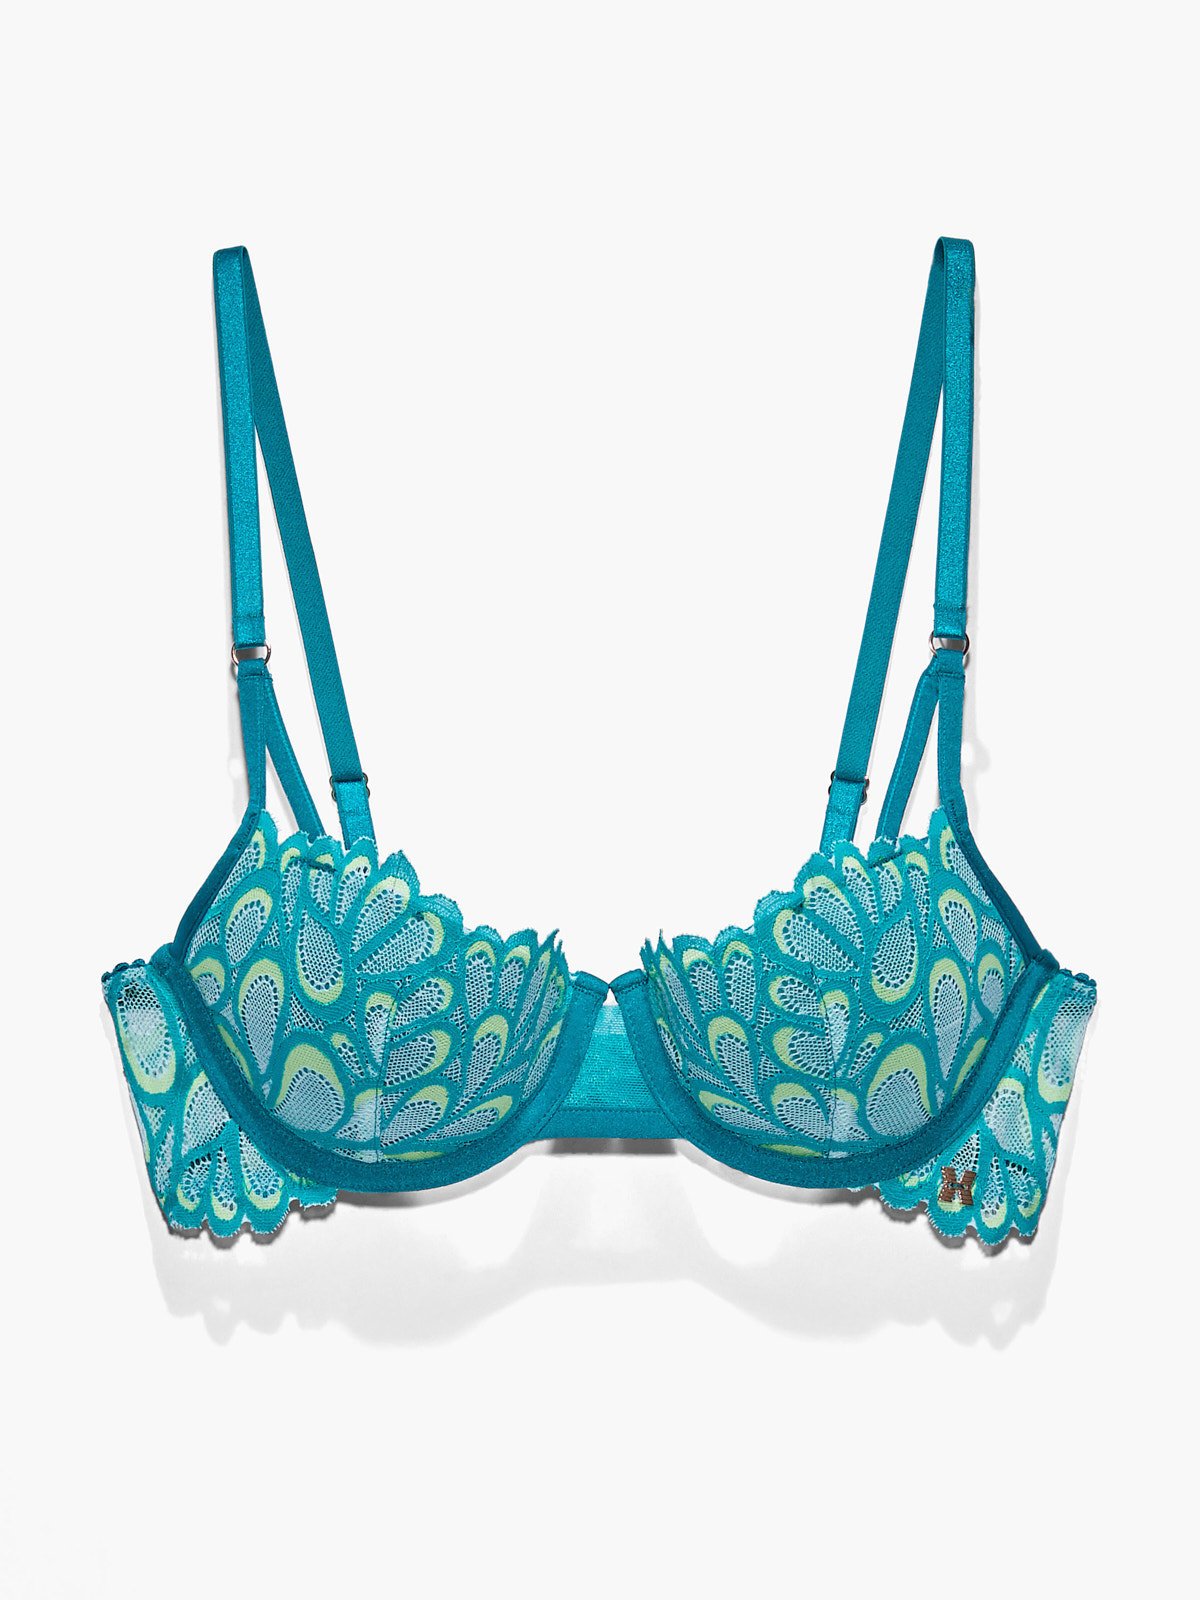 Bra Review: Evollove Fly High & Estate Blue Splash Print and Lace  Balconette, 32G/32FF – Let's talk about bras